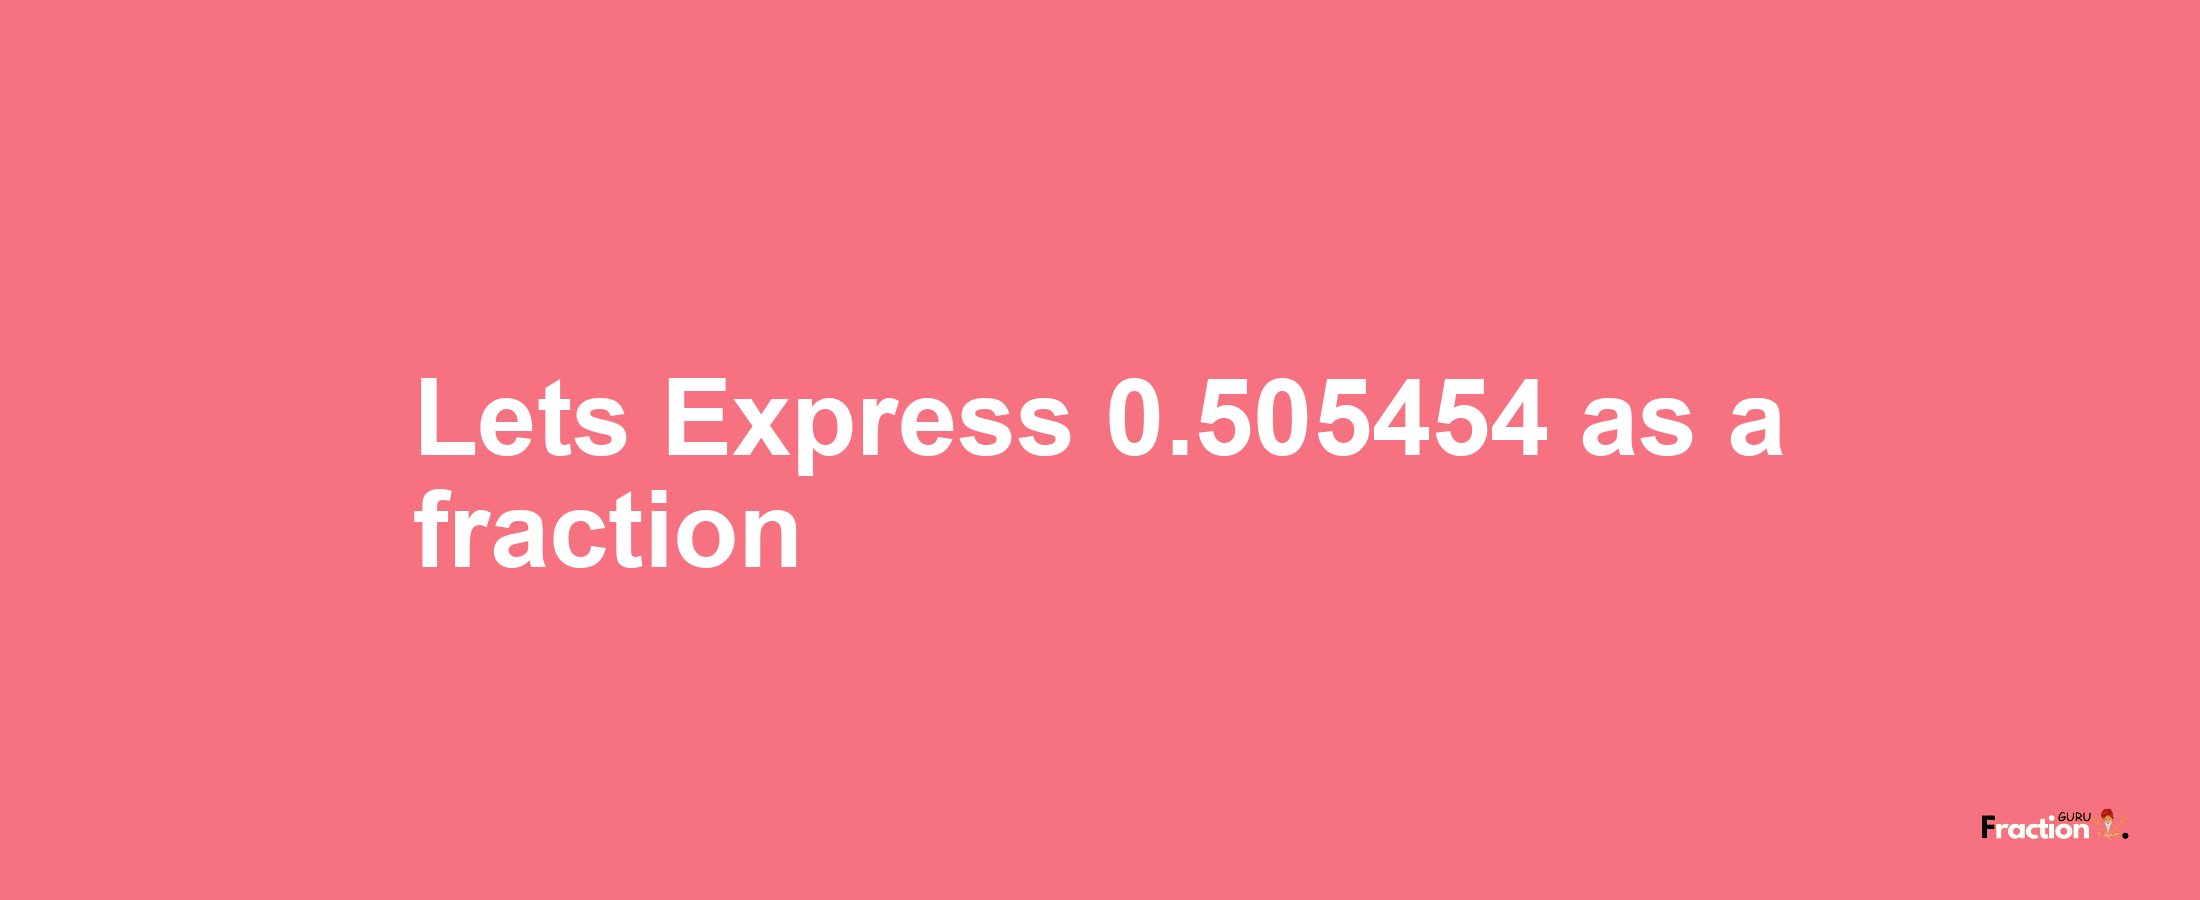 Lets Express 0.505454 as afraction